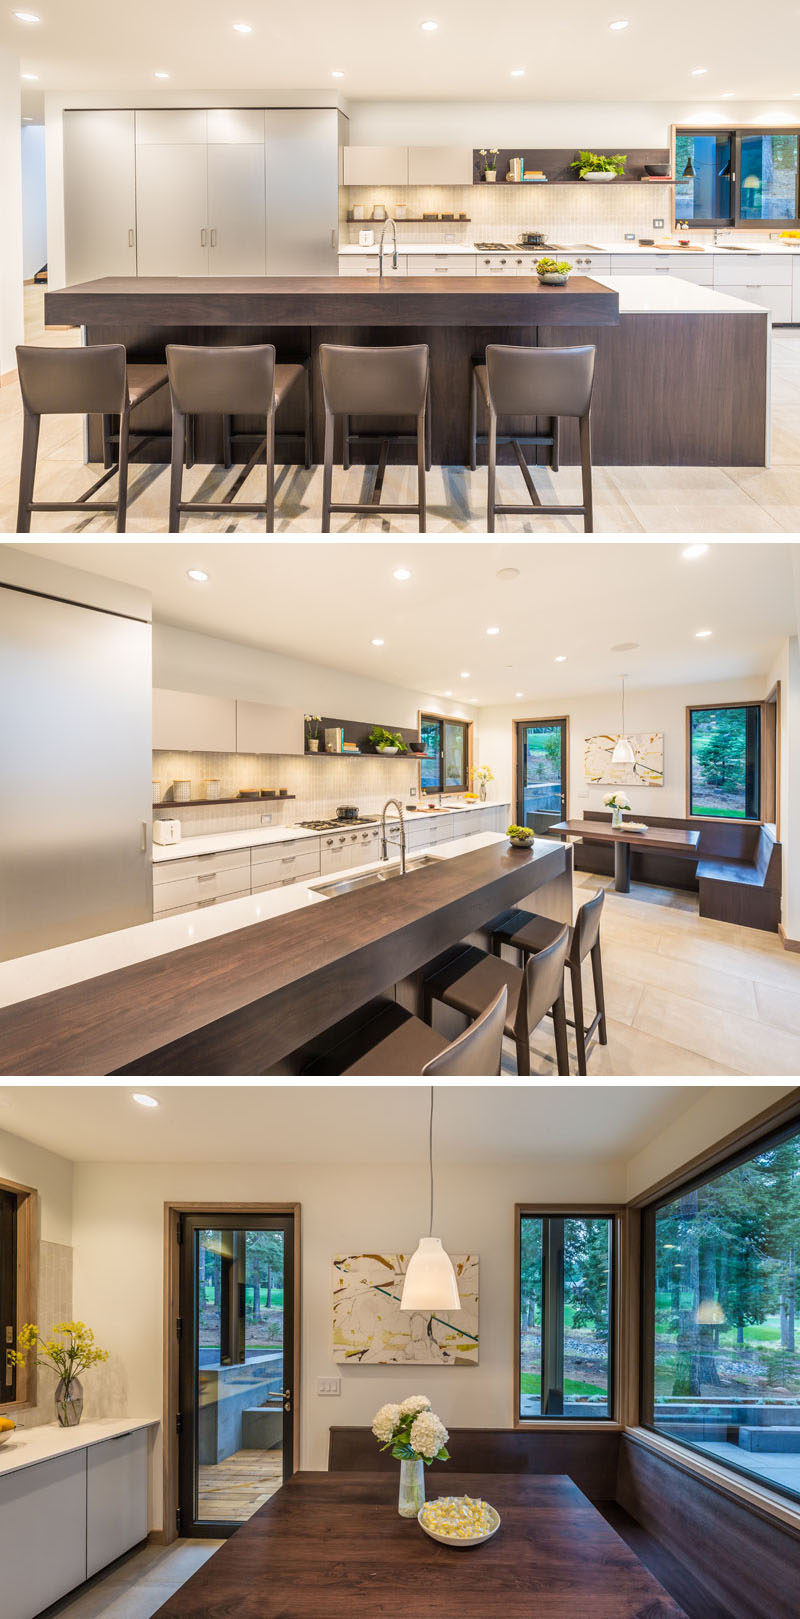 In this modern kitchen, a dark wooden island with bar has been paired with light colored cabinets and countertops. There's also an eat-in breakfast nook in the corner.